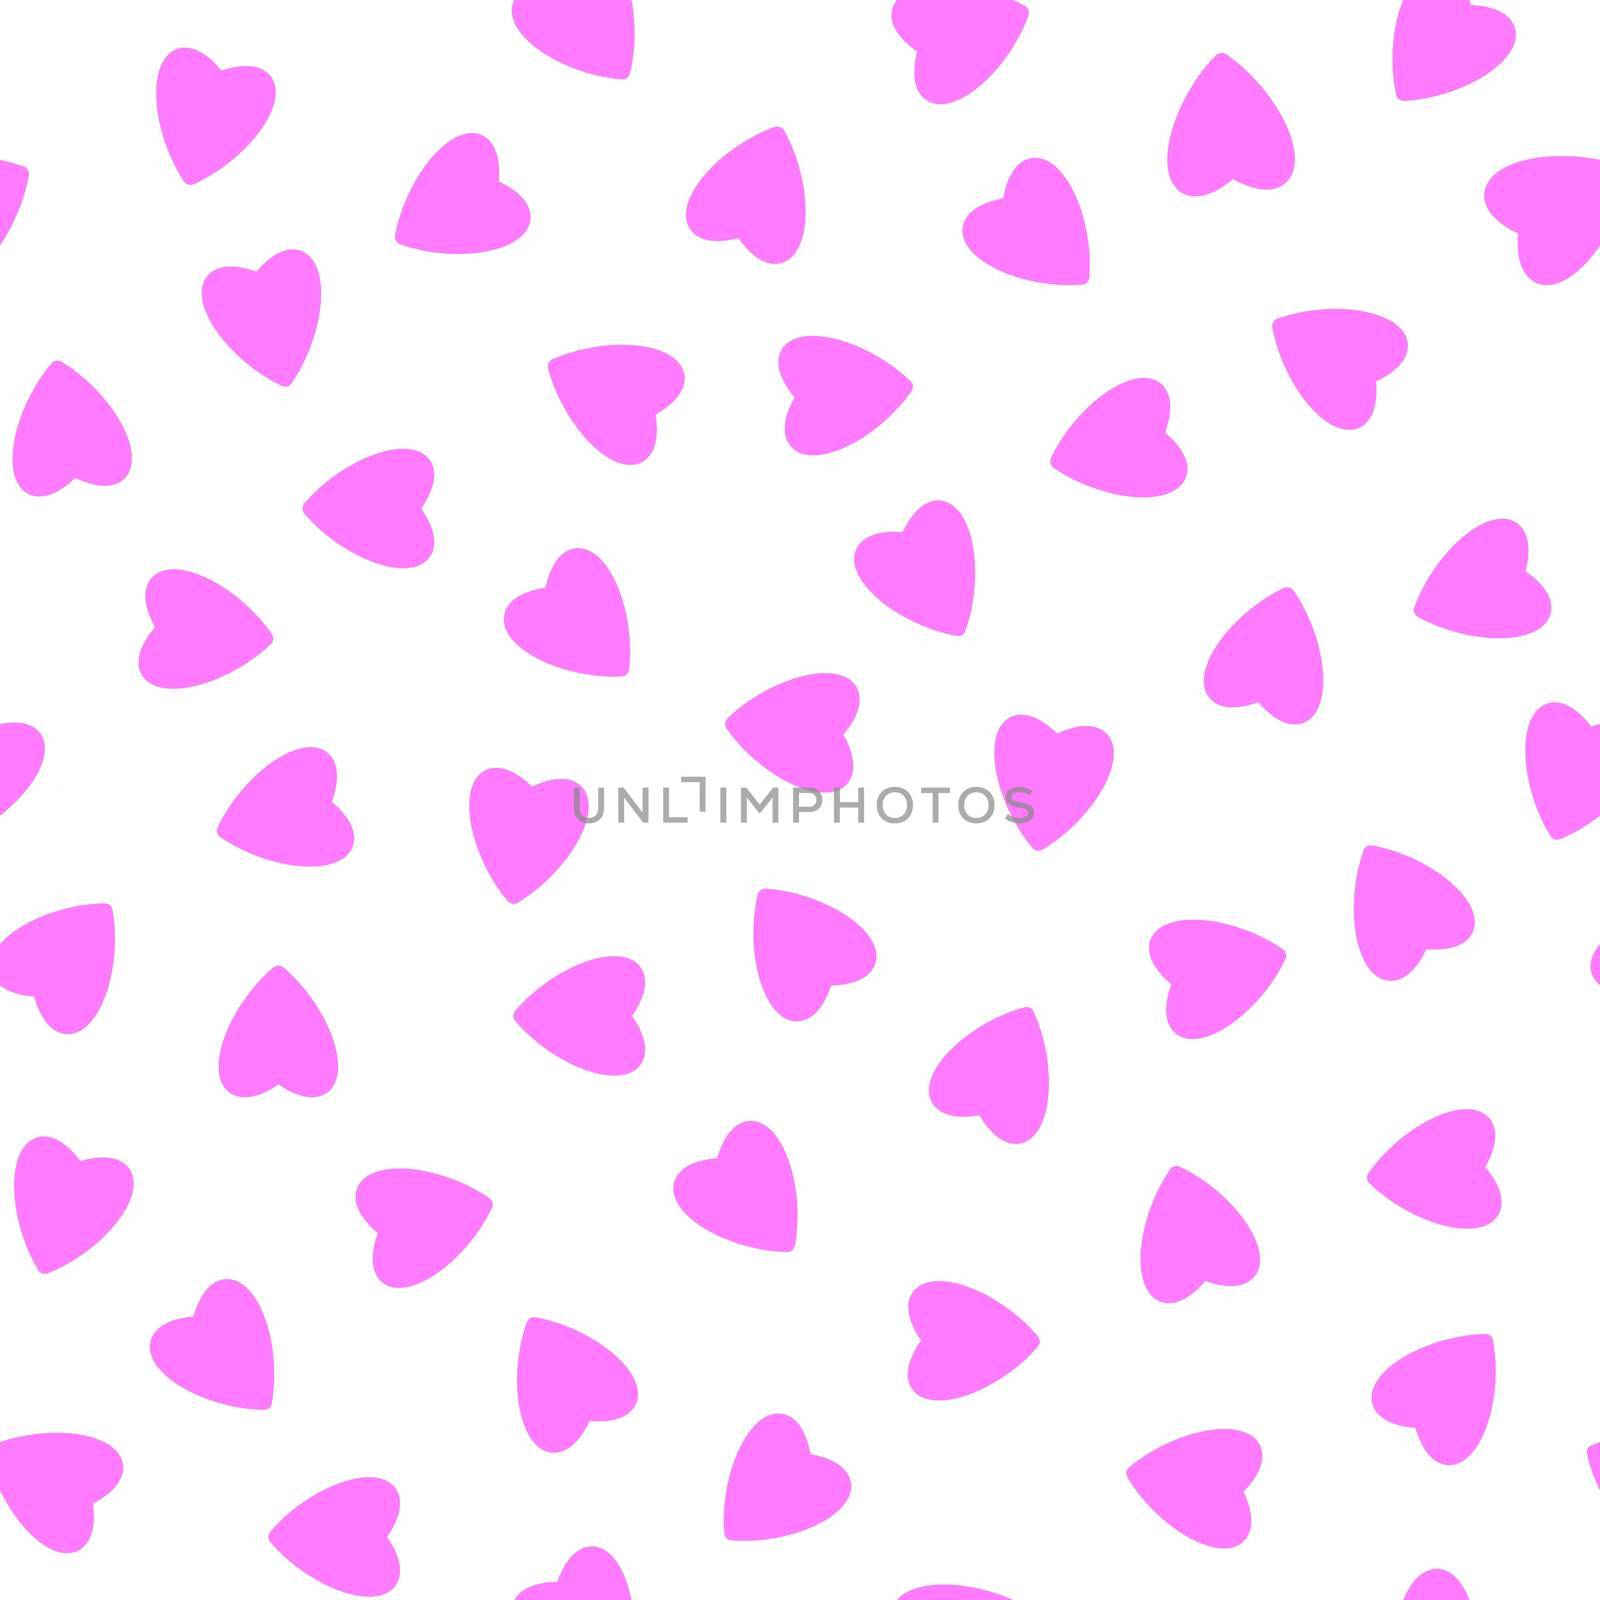 Simple hearts seamless pattern,endless chaotic texture made of tiny heart silhouettes.Valentines,mothers day background.Great for Easter,wedding,scrapbook,gift wrapping paper,textiles.Lilac on white by Angelsmoon